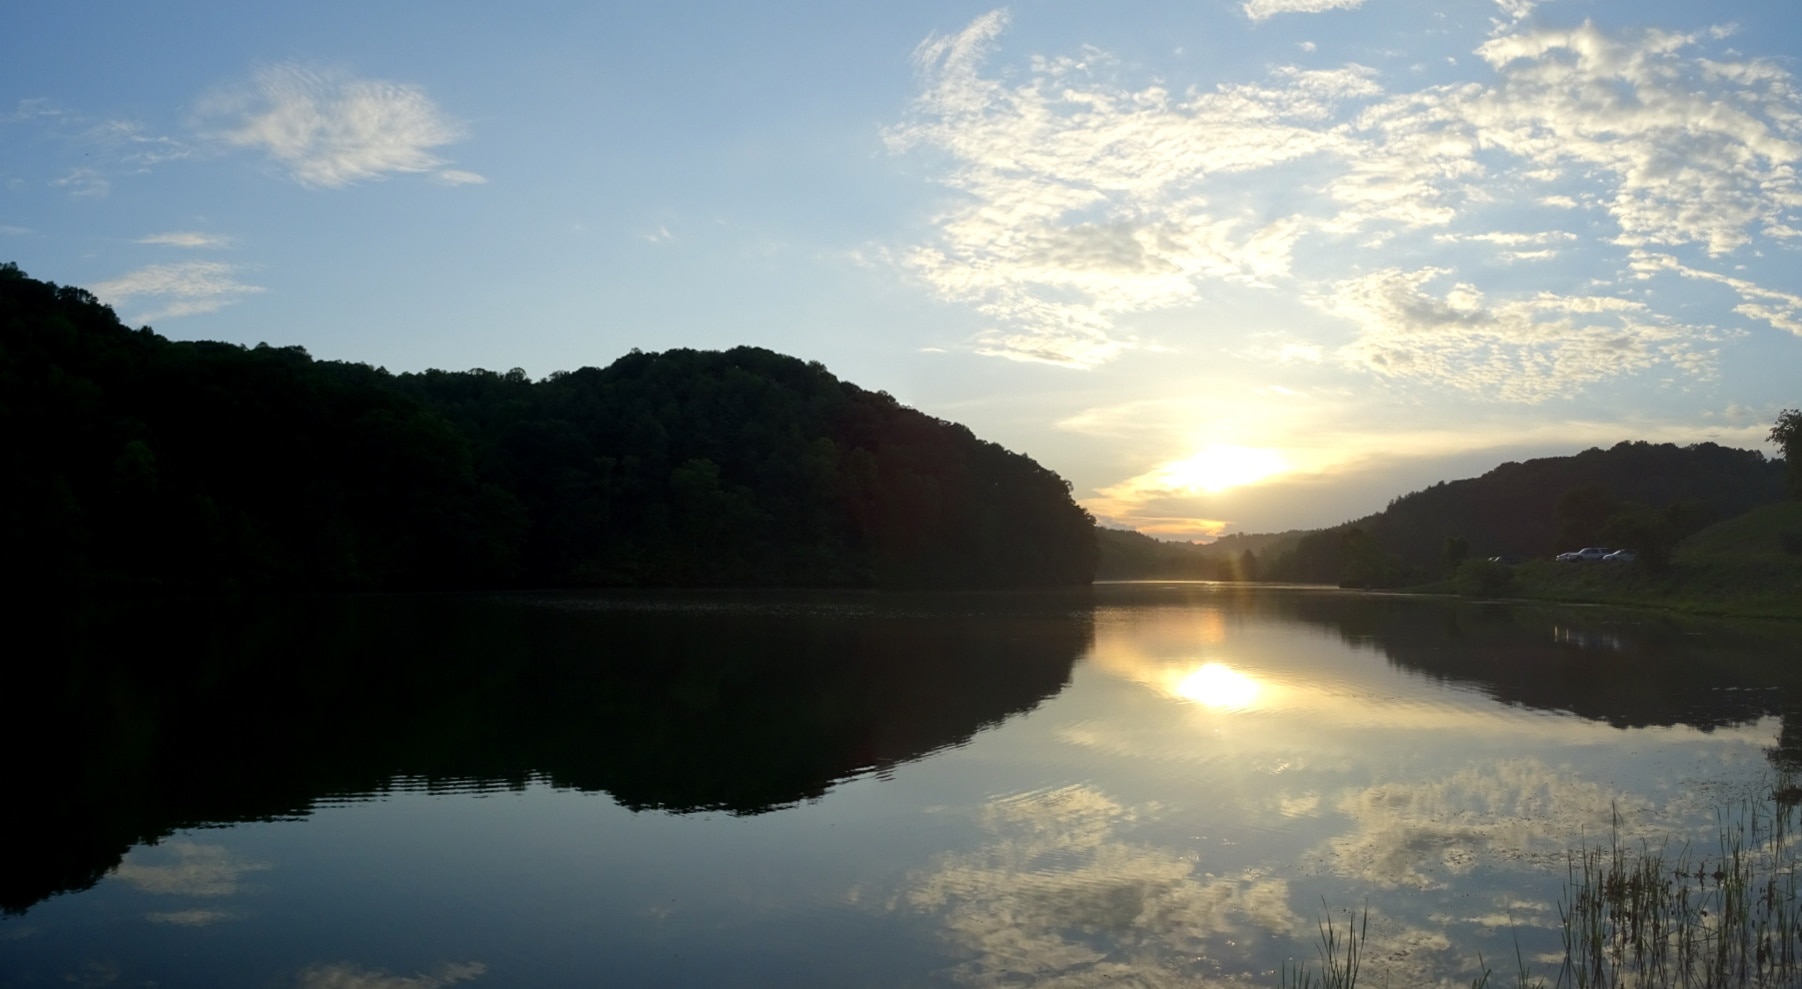 The sun setting and reflecting over Dow Lake at Strouds Run State Park.

Strouds Run State Park contains 2,606 acres of uninterrupted hardwood, the 161-acre Dow Lake, a 900-foot sand beach, 6 #hiking trails, 15 mountain biking/hiking trails and 10 bridle/hiking trails.